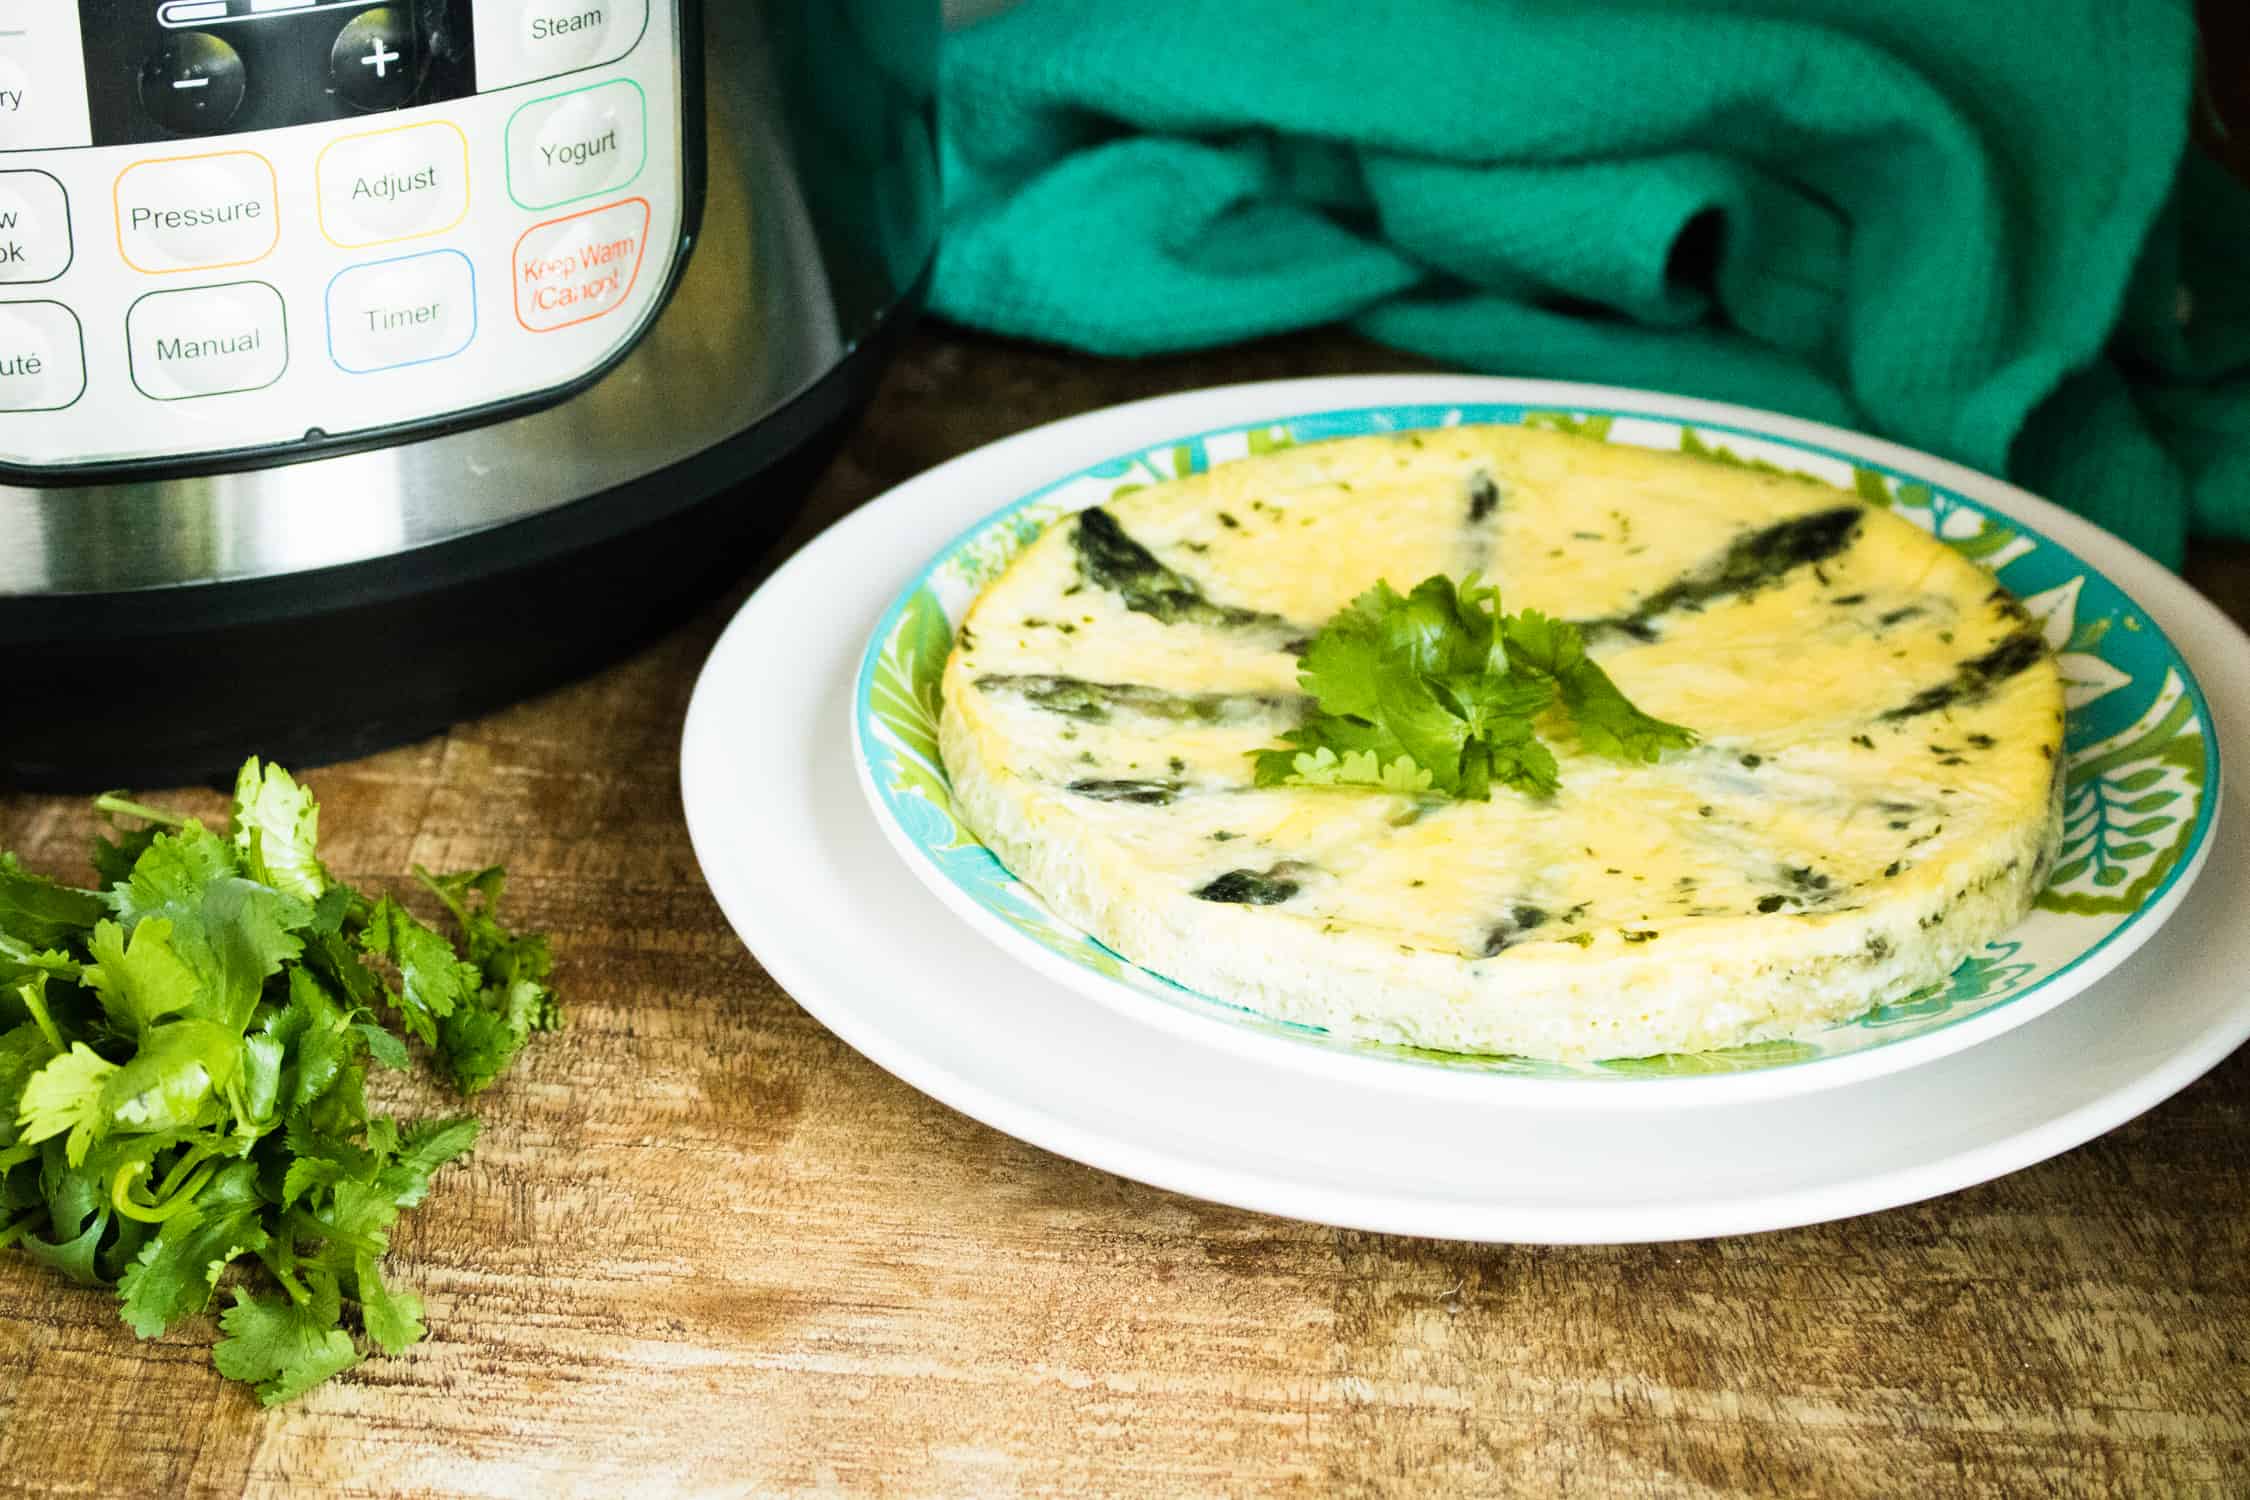 Instant Pot Asparagus Parmesan Frittata served on a blue print plate and garnished with parsley